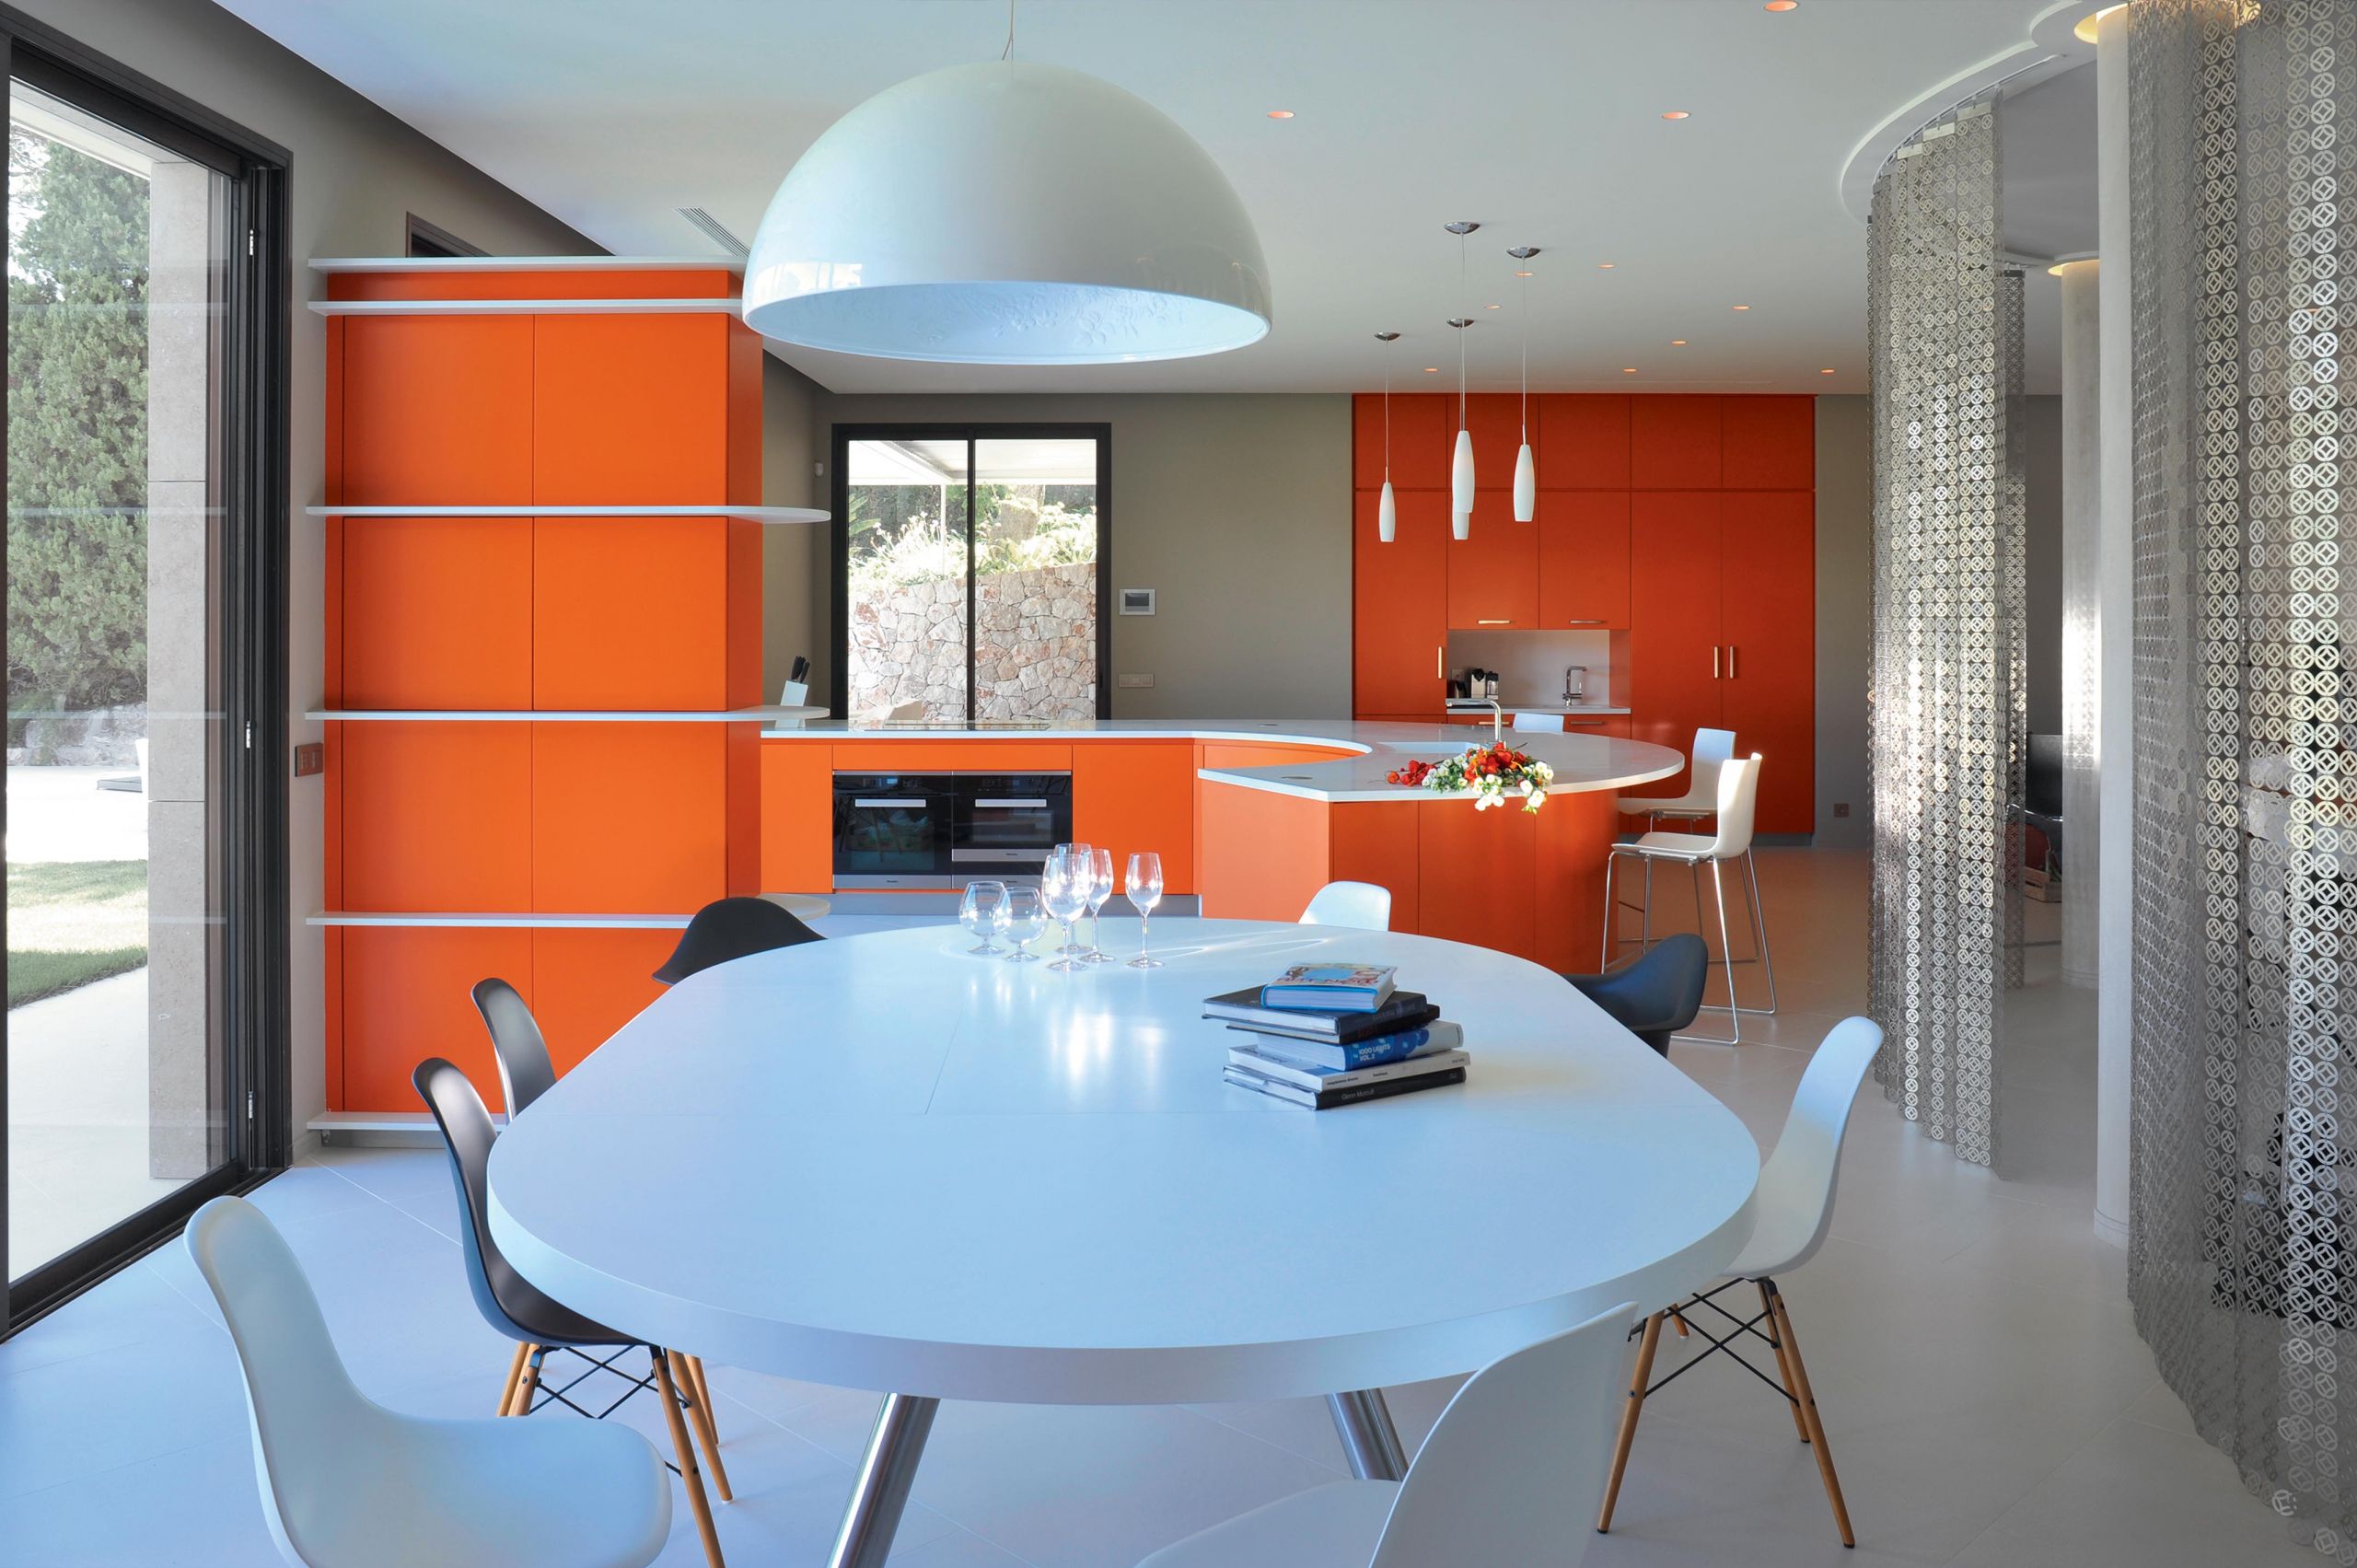 A gently curving design, Corian countertops, and integrated handles